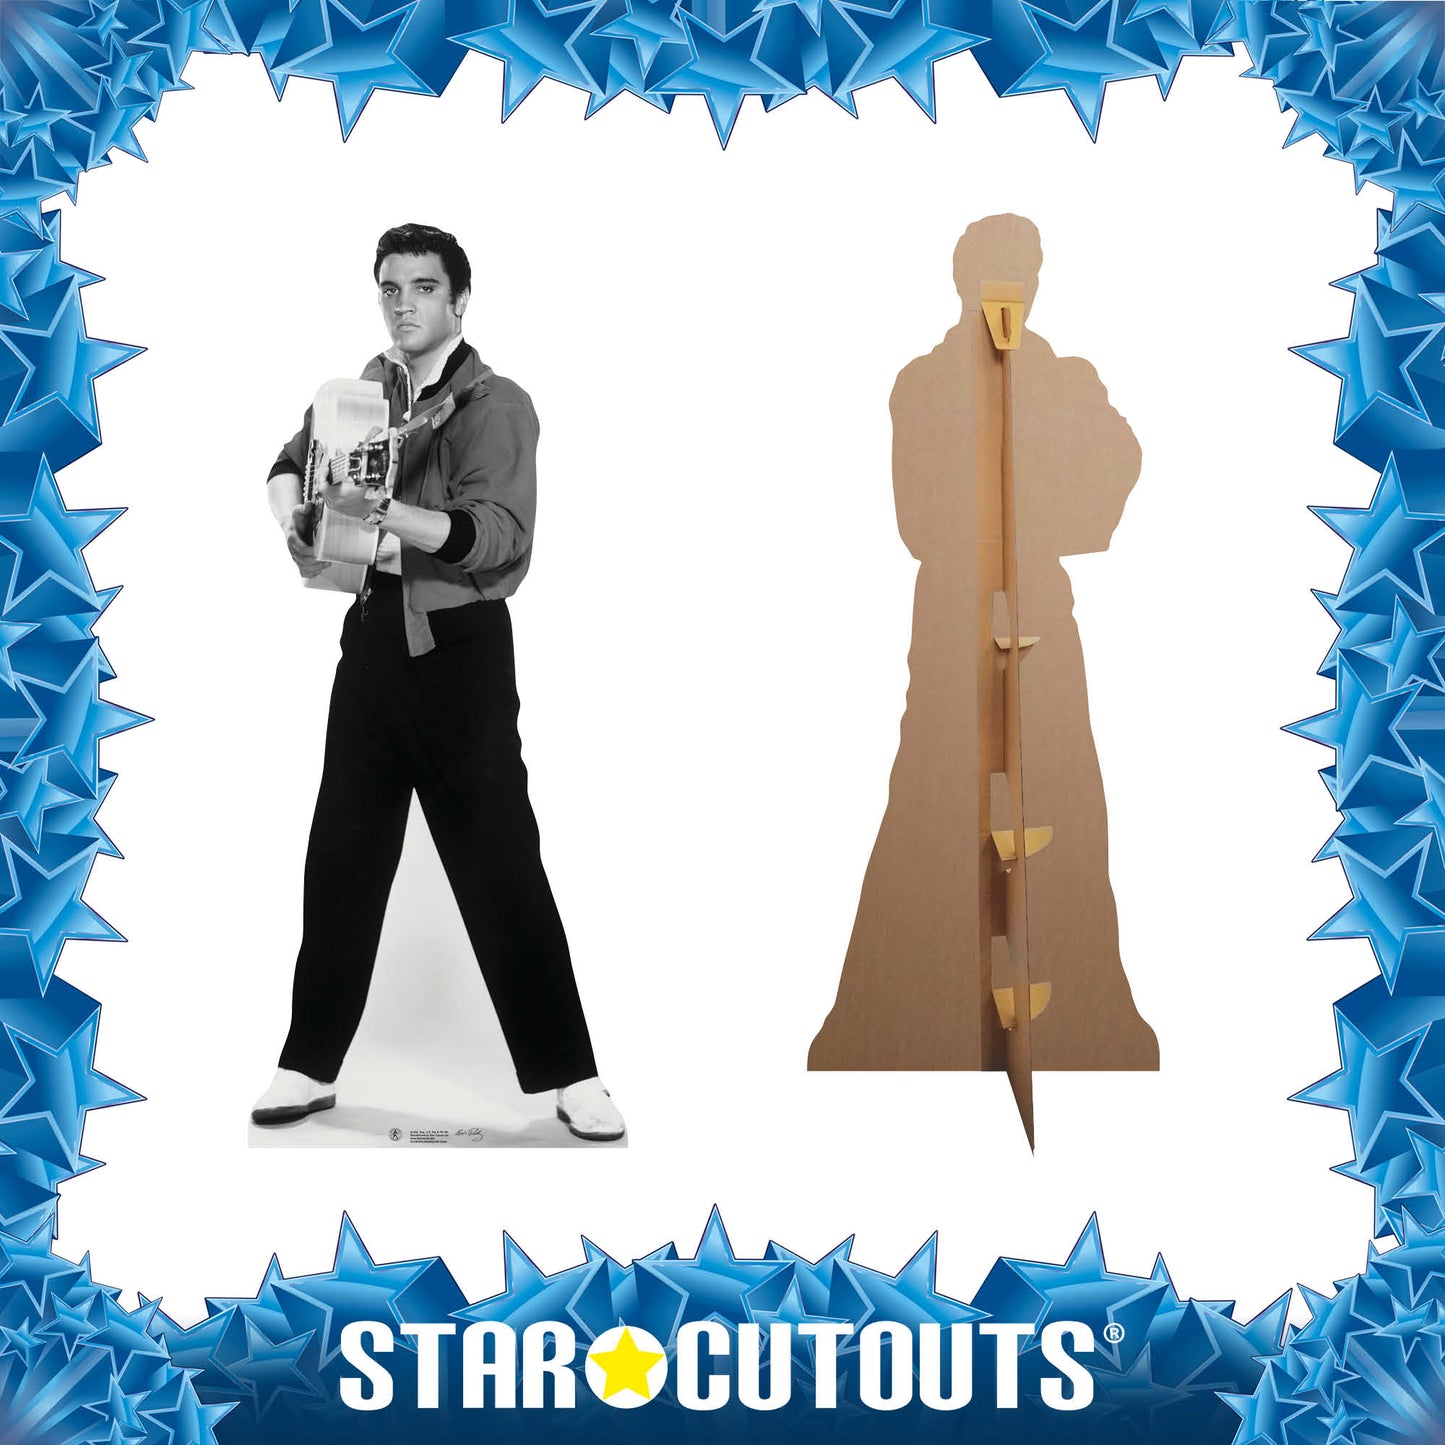 SC238 Elvis Shooting with Guitar Cardboard Cut Out Height 180cm